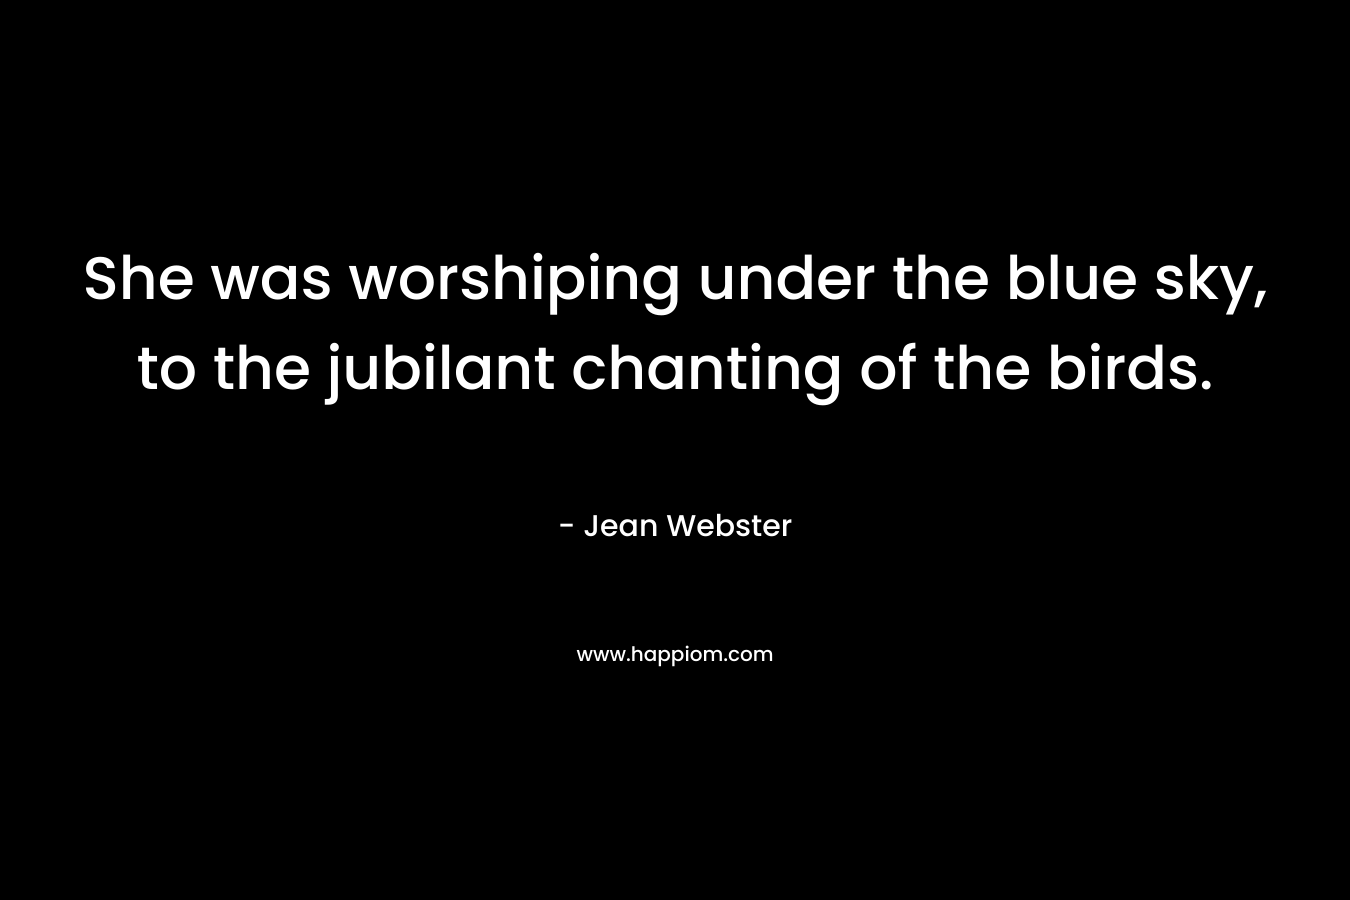 She was worshiping under the blue sky, to the jubilant chanting of the birds. – Jean Webster